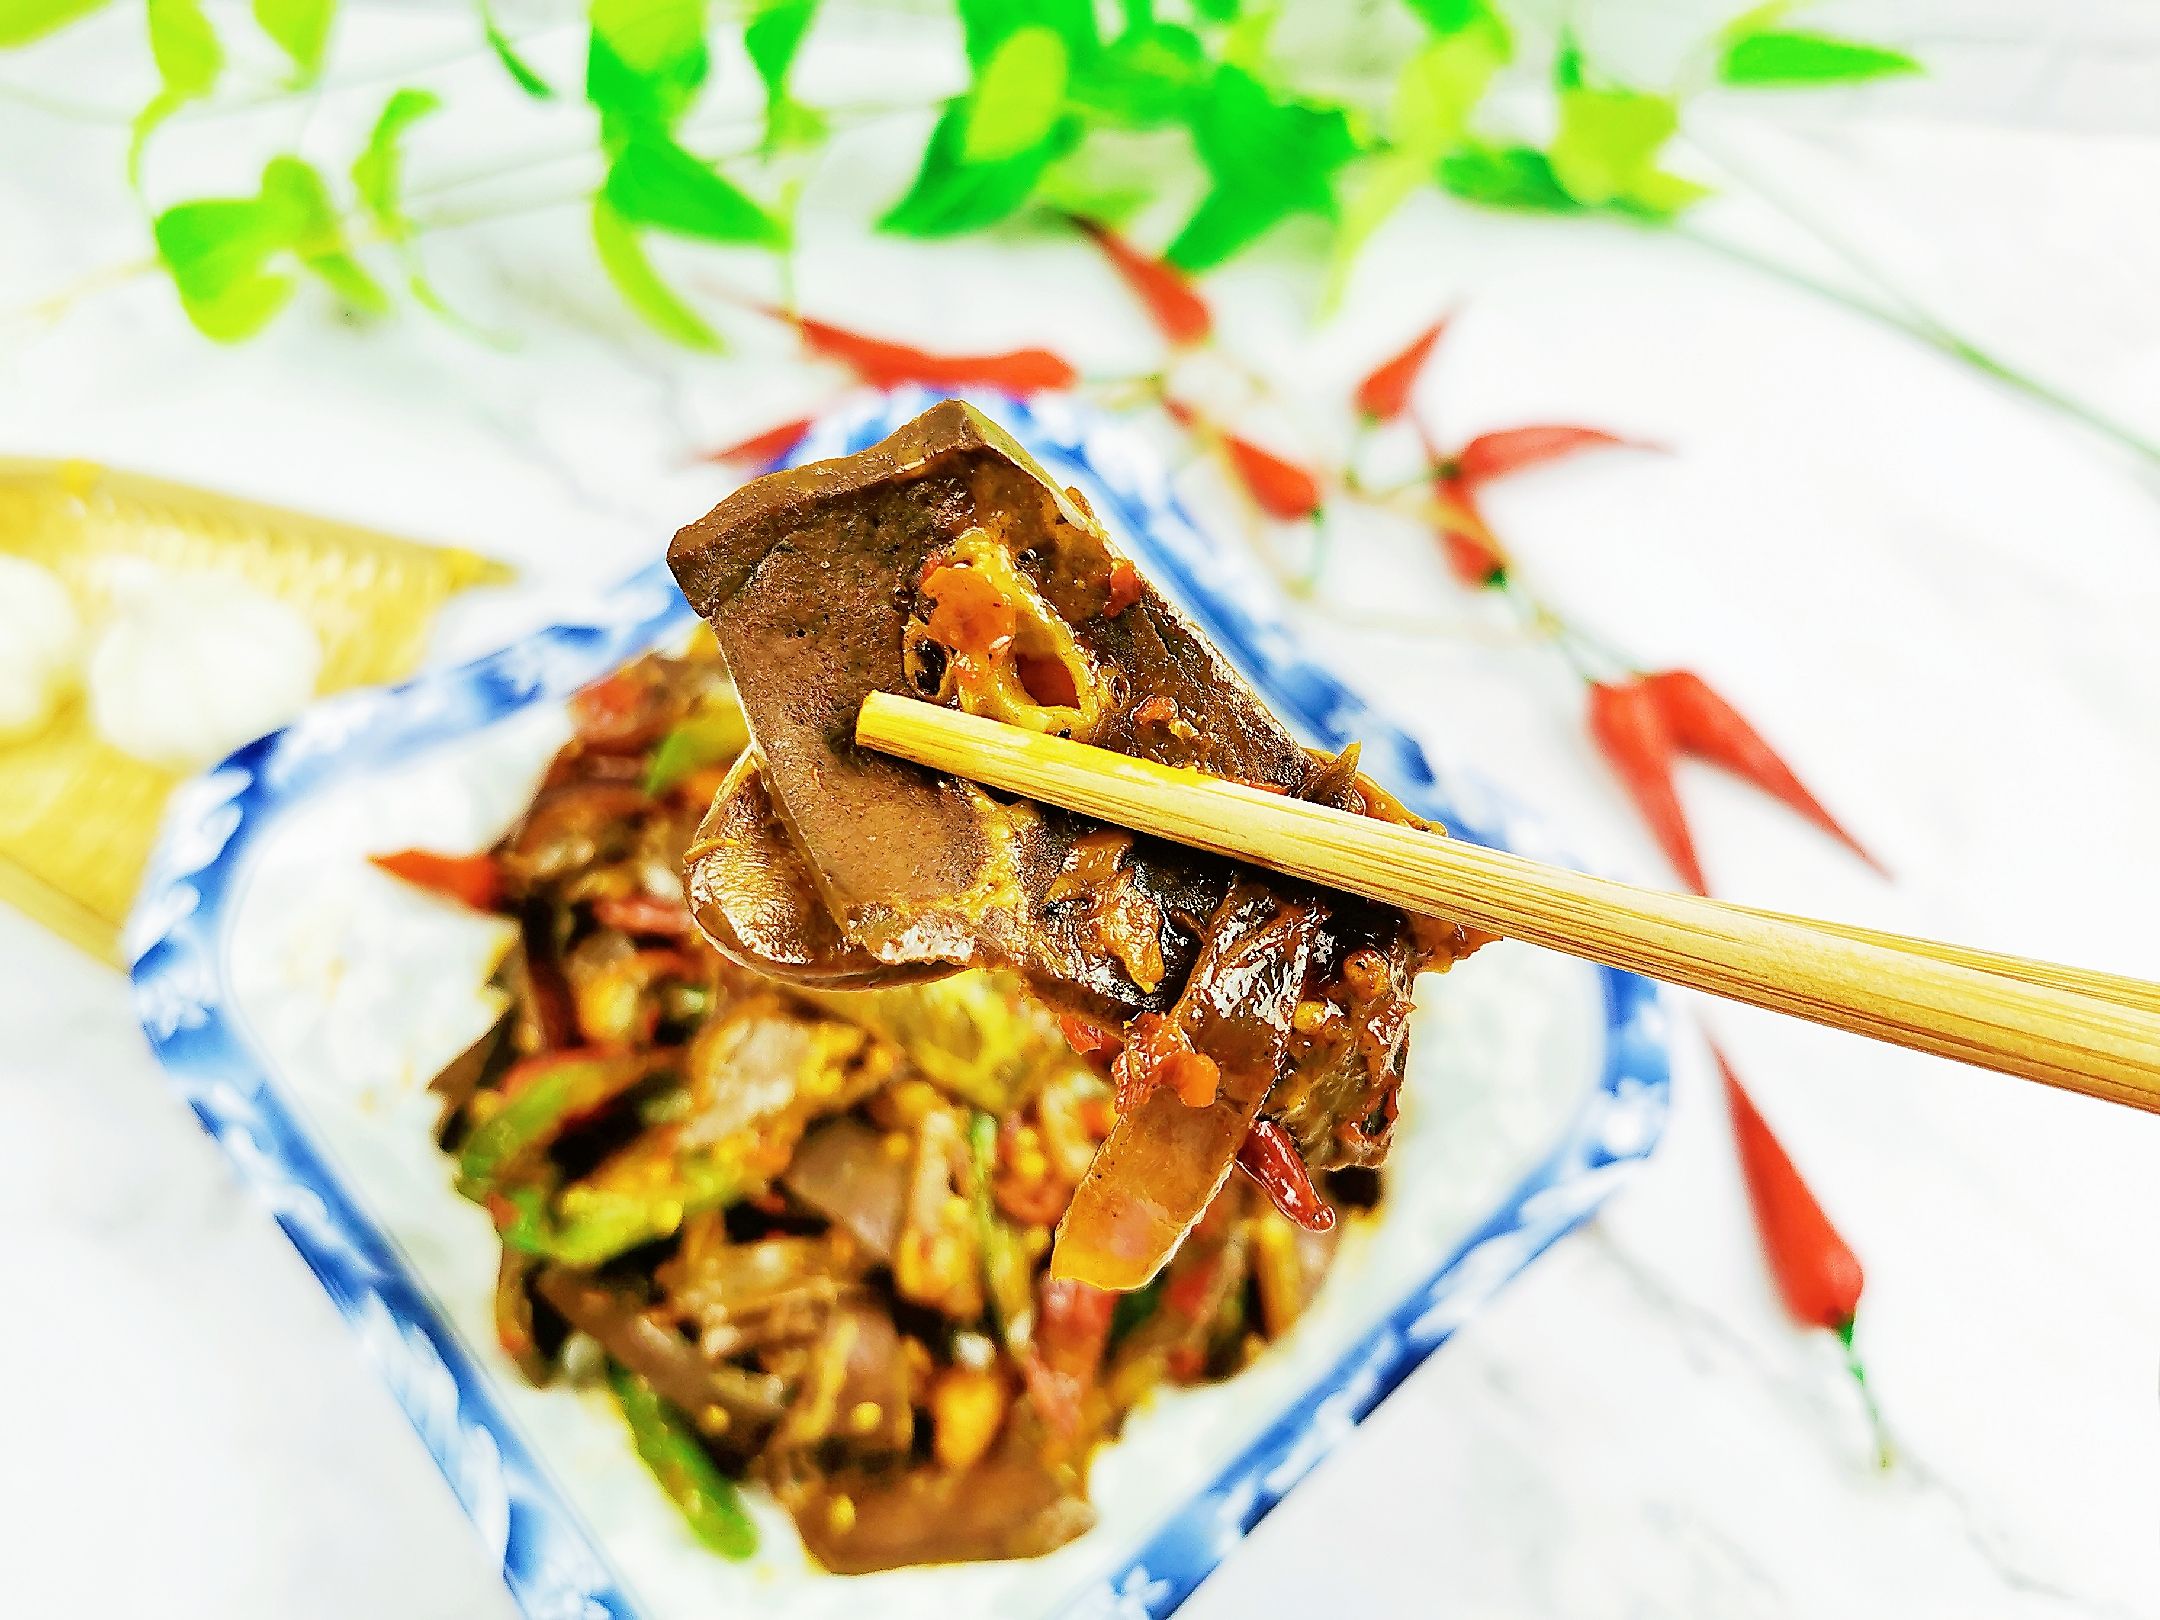 Spicy Stir-fried Heart and Lungs recipe